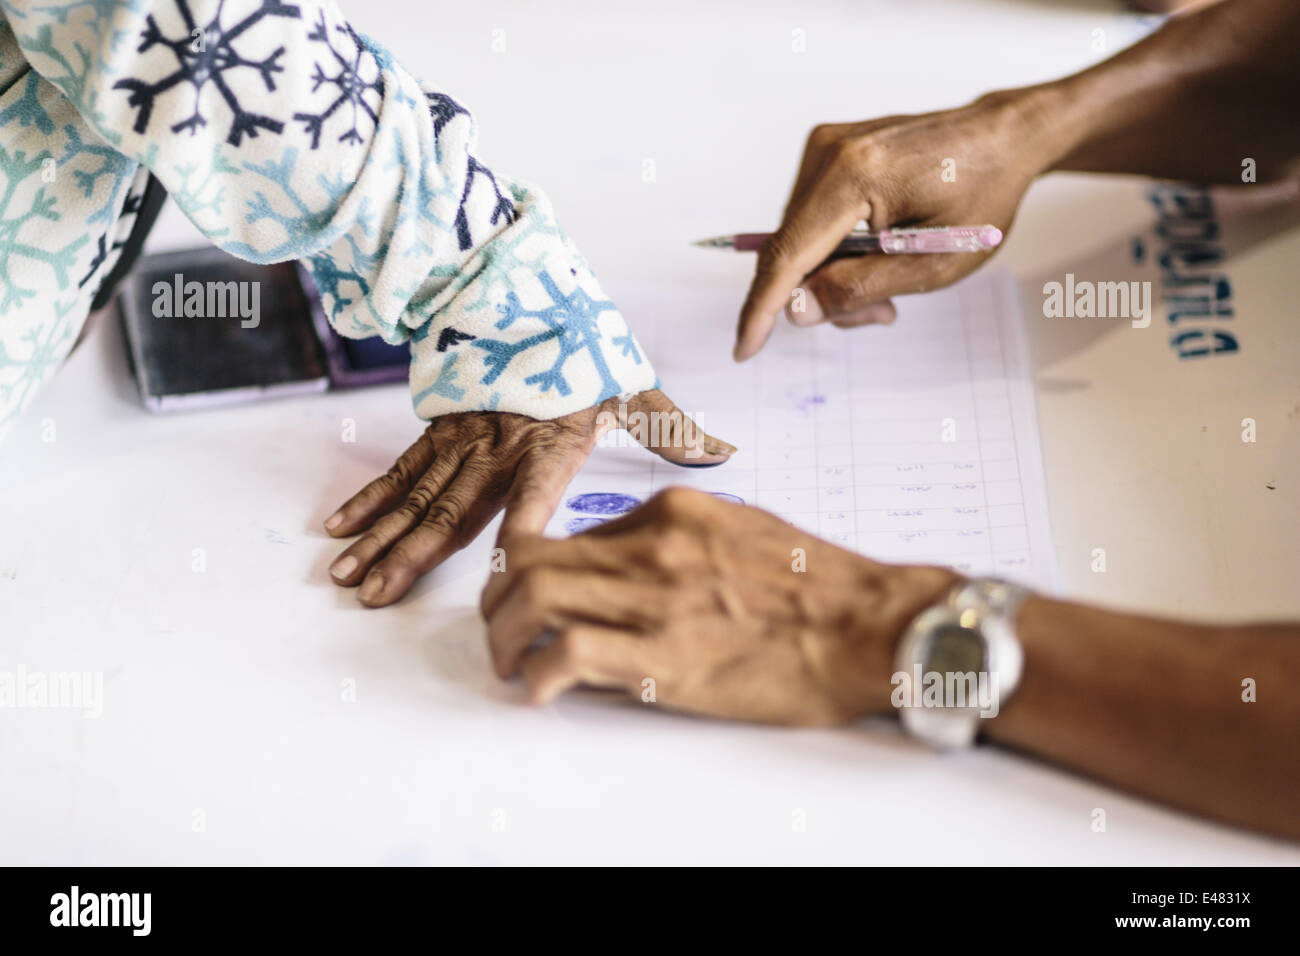 June 16, 2014 - Aranyaprathet/Poipet, Sa Kaeo Province, Thailand - Migrant Cambodian workers register their names and leave their fingerprints with Thai military personnel before they are transported to the border and return home during a mass exodus of Cambodian immigrants from Thailand, Aranyaprathet Town Centre, Aranyaprathet/Poipet, Thailand. Fearing a crackdown on illegal immigration from the Thai military, over 120,000 Cambodian migrants are reported to have crossed the border and returned to Cambodia in one week. Estimates suggest that at least 150,000 legal and illegal migrants from Ca Stock Photo